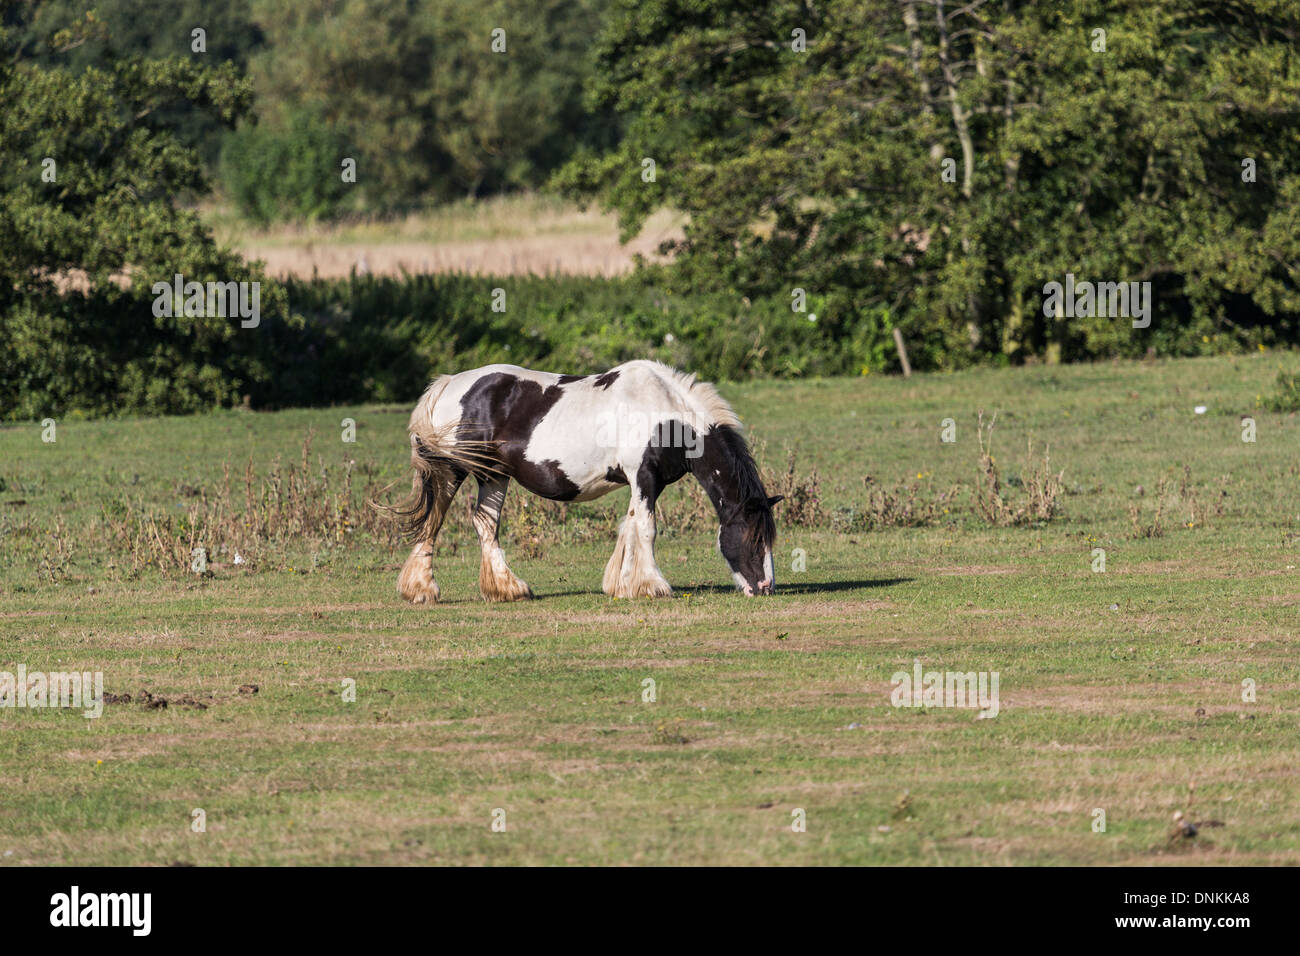 Black and white carthorse peacefully grazing in field in Surrey countryside Stock Photo